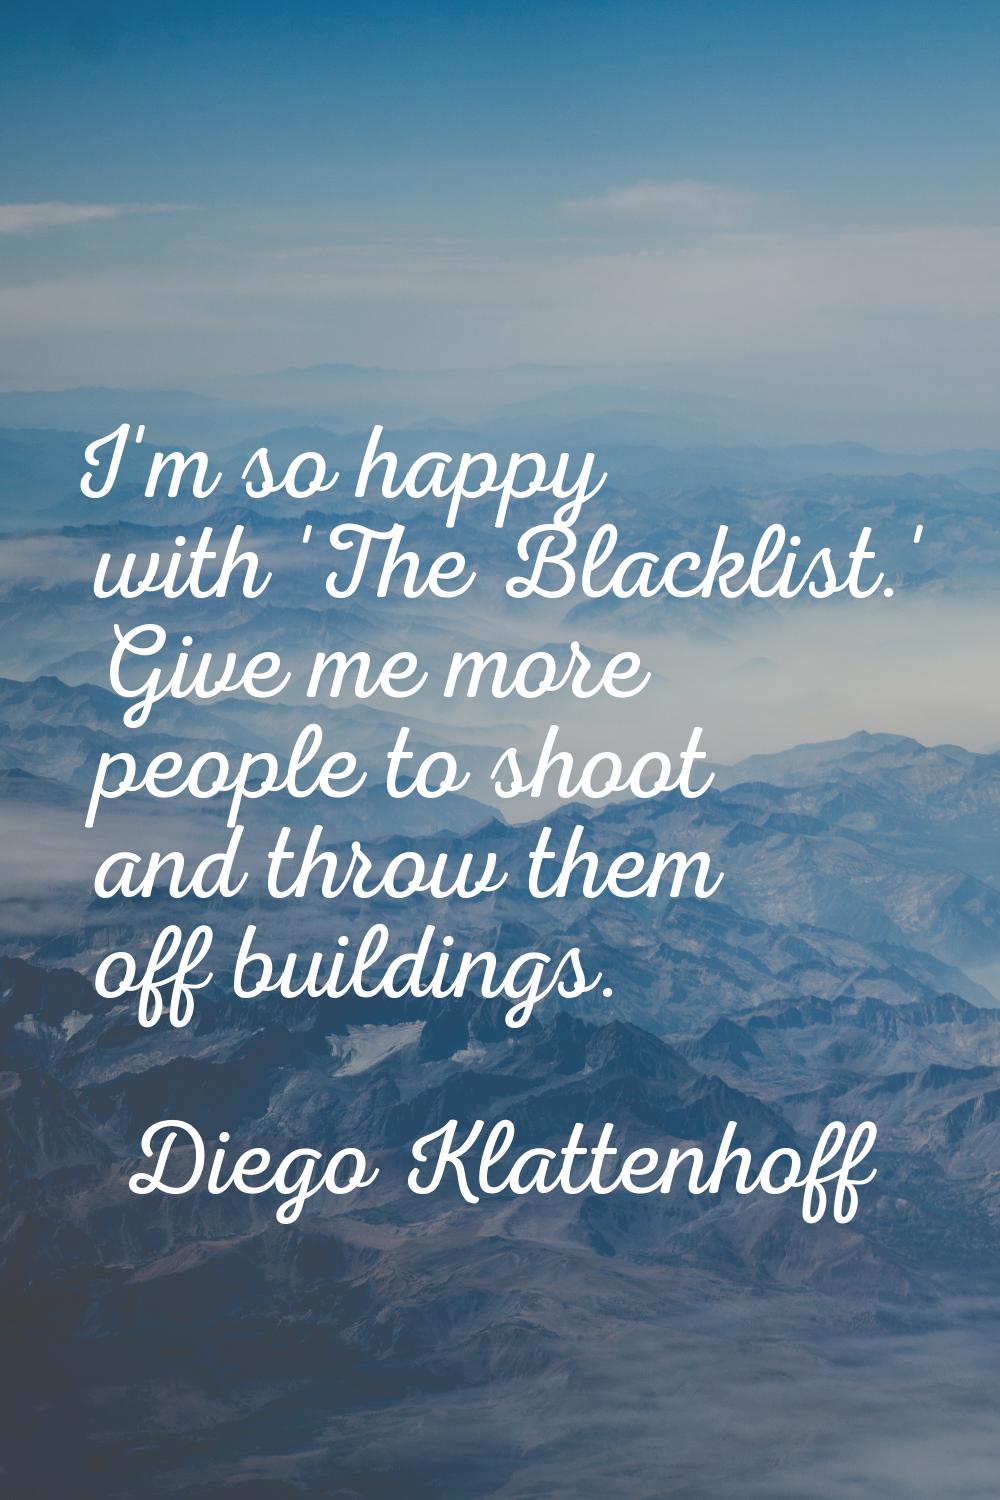 I'm so happy with 'The Blacklist.' Give me more people to shoot and throw them off buildings.